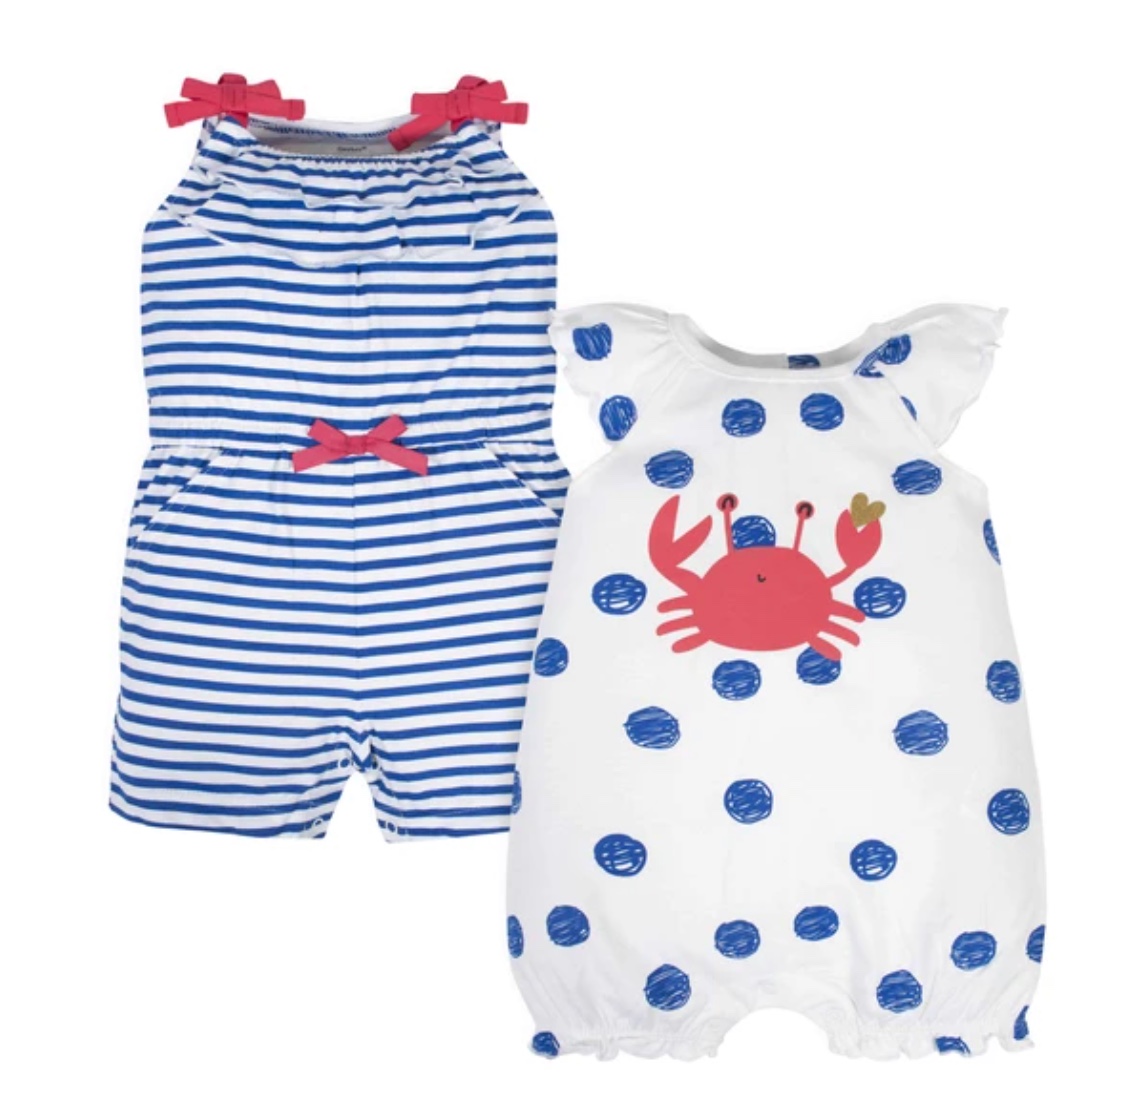 let gerber's childrenswear line help you prepare a great baby shower gift | so many great baby shower gift options!